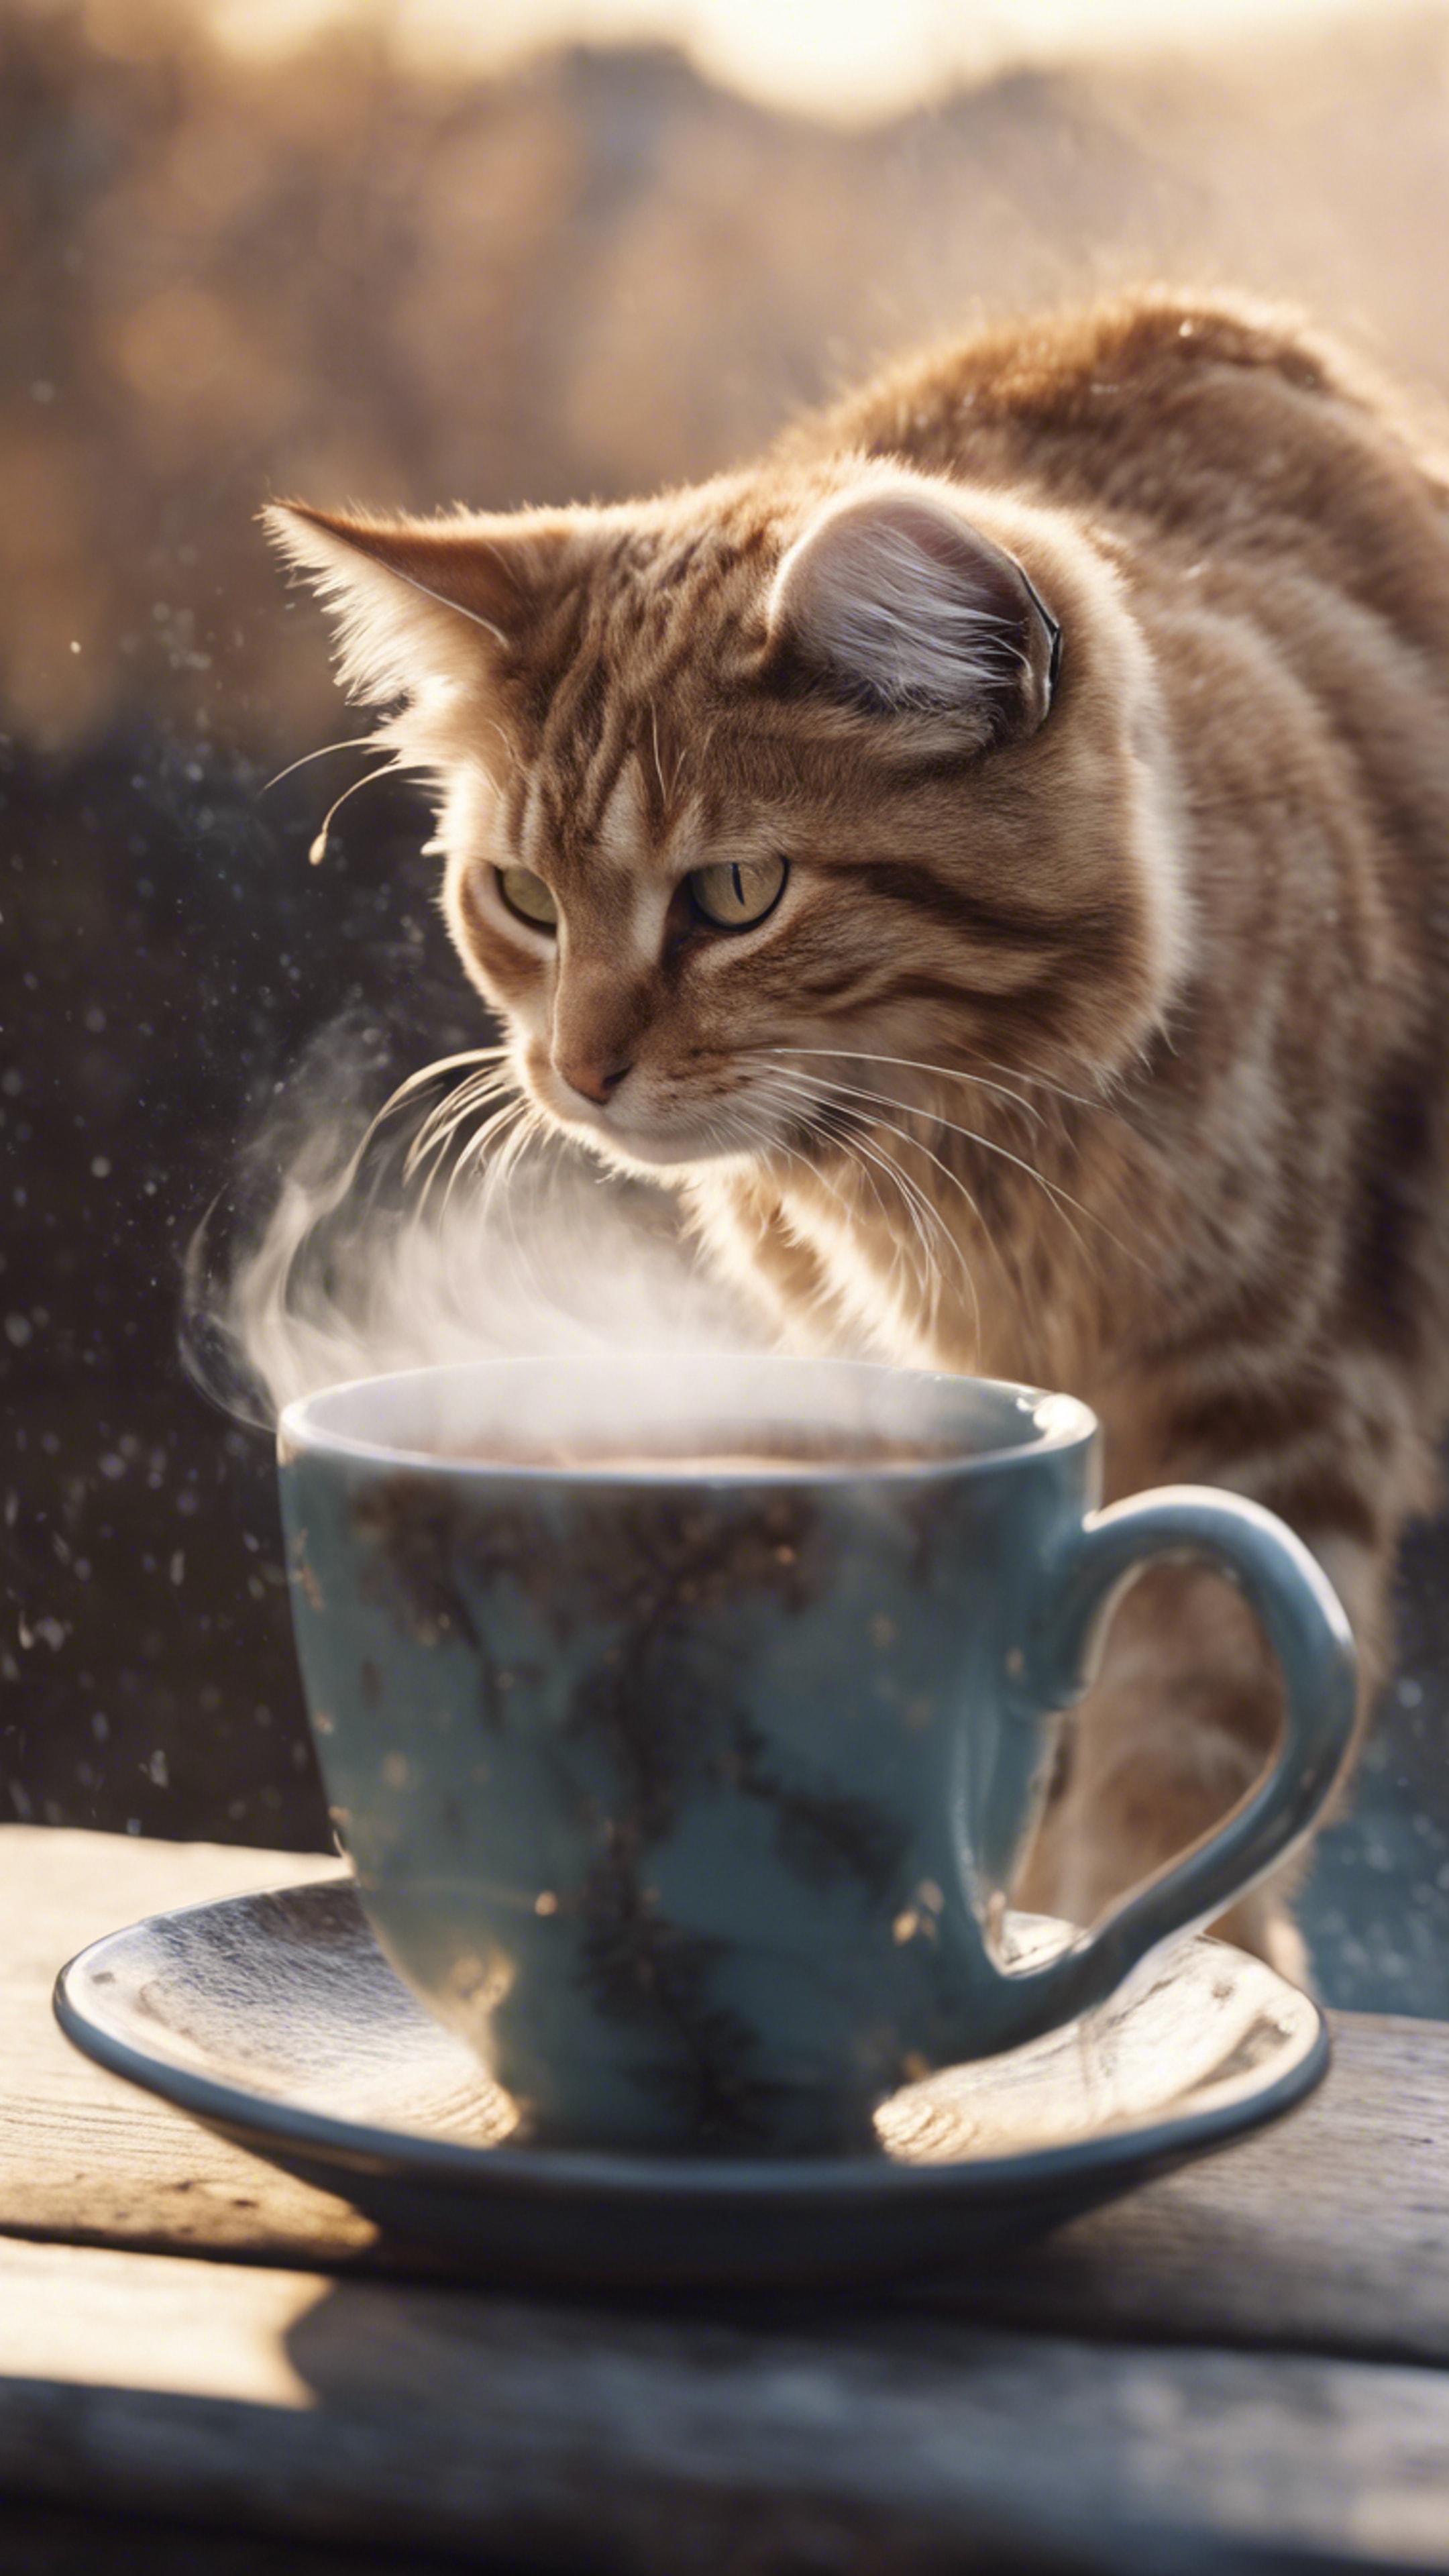 A lukewarm cup of coffee, with a steam motif of a cat hissing against a chilly winter morning. Hintergrund[d53de69744a34ba58639]